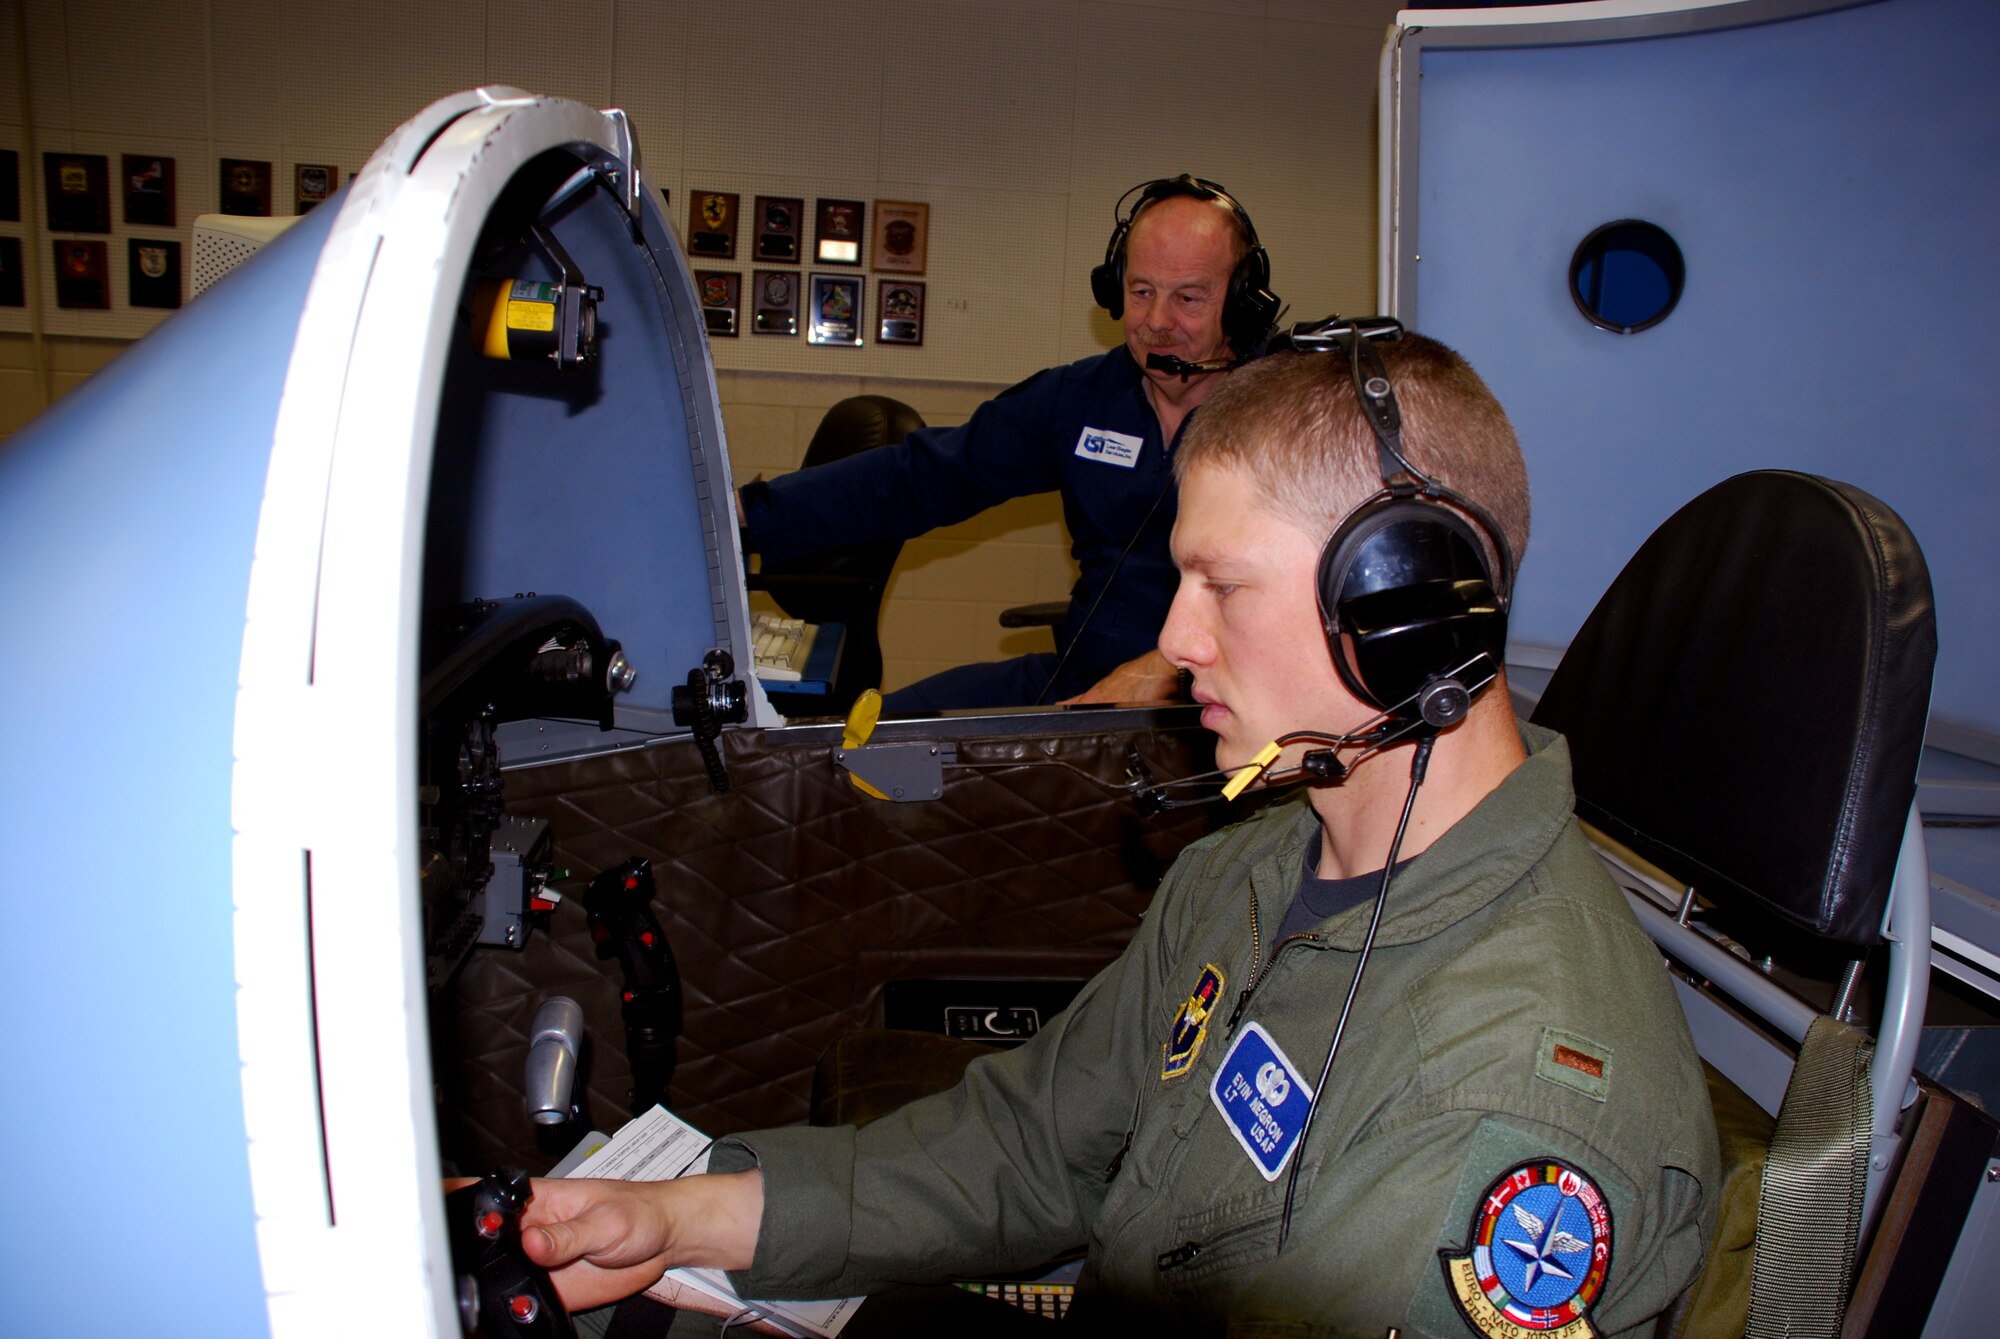 Second Lt. Evan Negron, a T-37 Tweet student pilot at the Euro-NATO Joint Jet Pilot Training Program, conducts the last simulation by a student pilot in the Air Force April 23. The T-6A Texan II will replace the Tweet this summer when the more than 50-year-old introductory trainer retires. Also pictured (blue flight suit) is Wolfgang Ruhl, a simulator instructor at Sheppard. Mr. Ruhl has trained every ENNJPT class since the organization was formed in 1981. (U.S. Air Force photo/John Ingle)